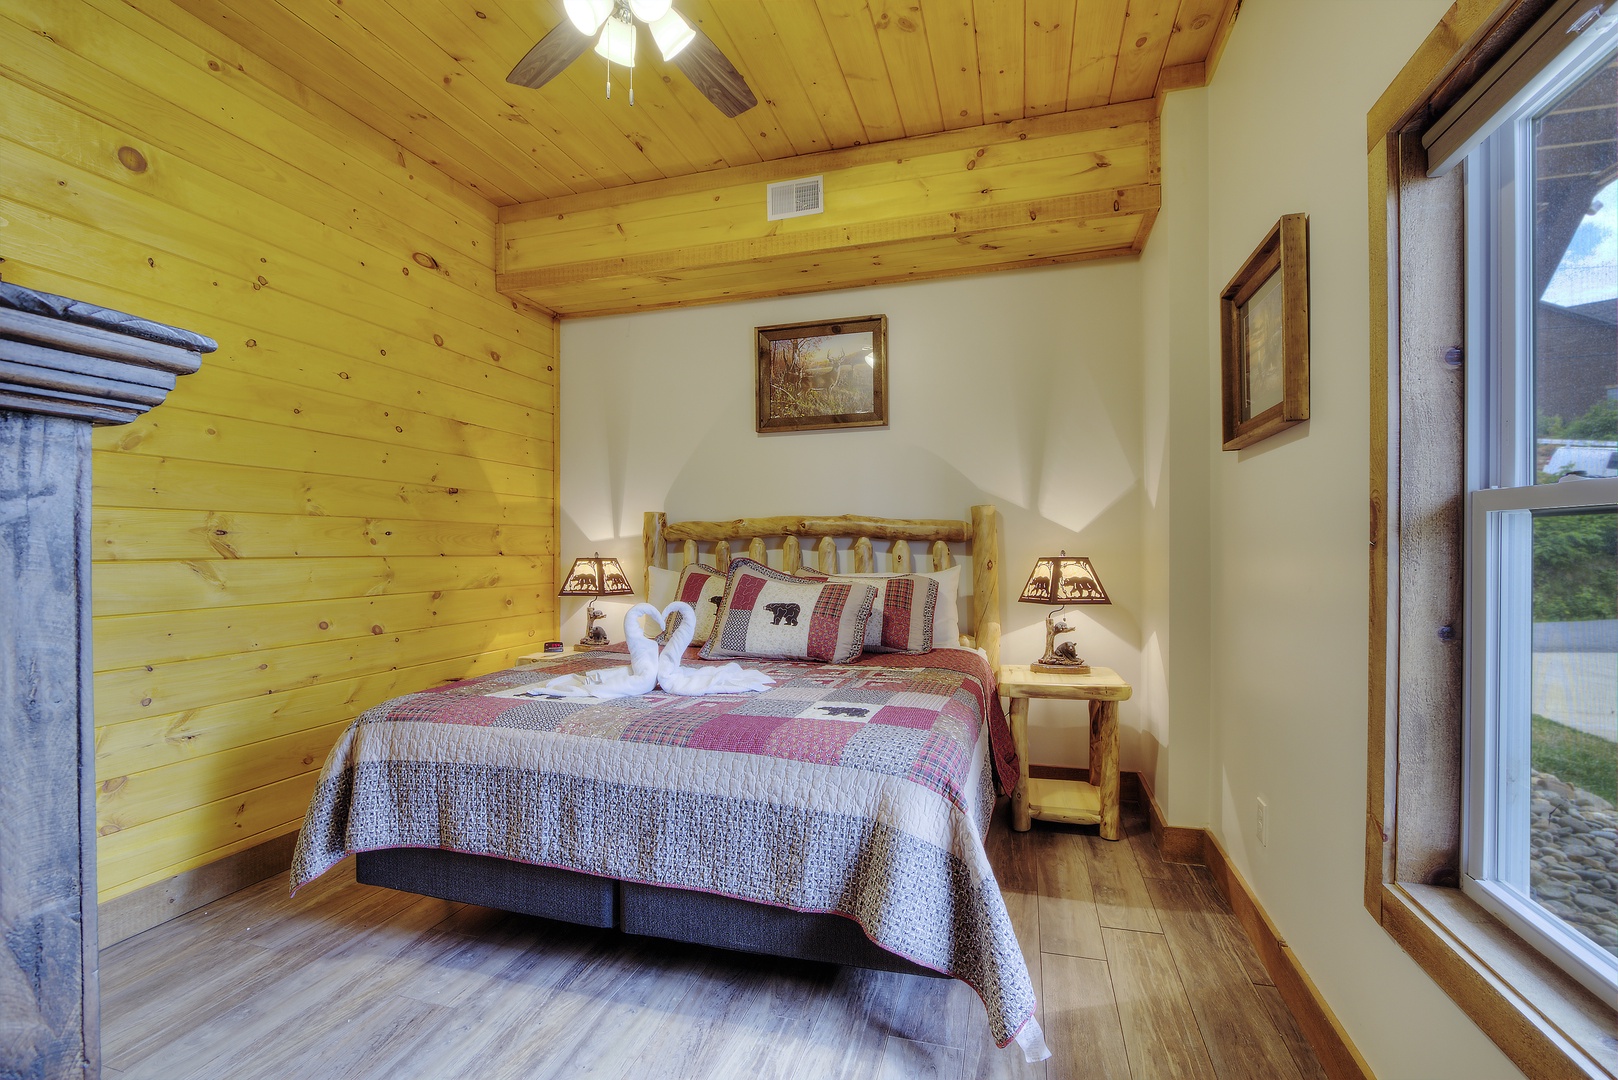 Bedroom with Log Bed at The Best View Lodge, a 5 bedroom cabin rental located in gatlinburg